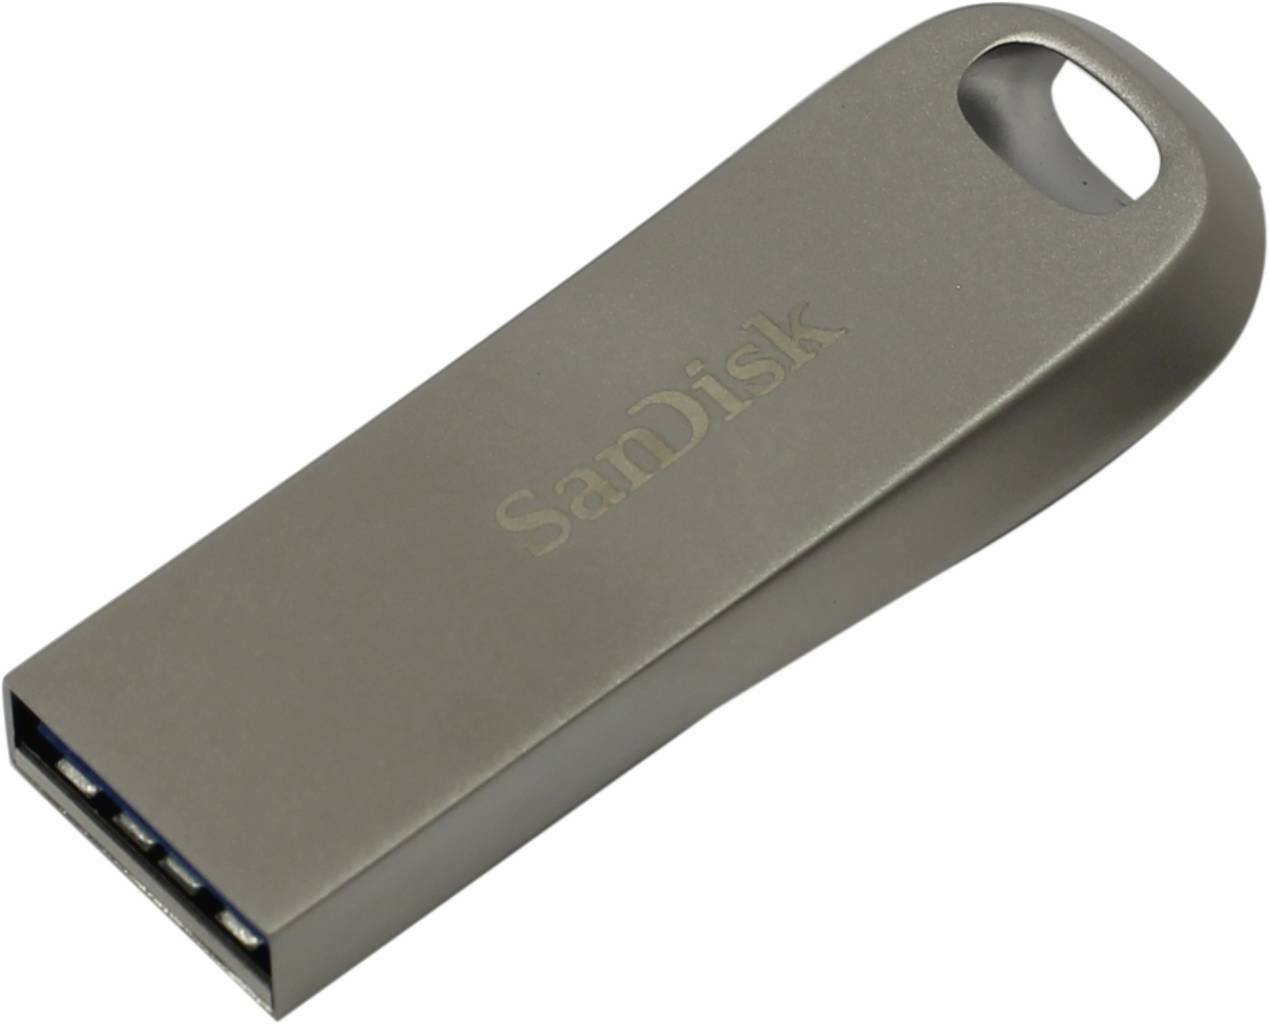   USB3.1 32Gb SanDisk Ultra Luxe [SDCZ74-032G-G46] (RTL)